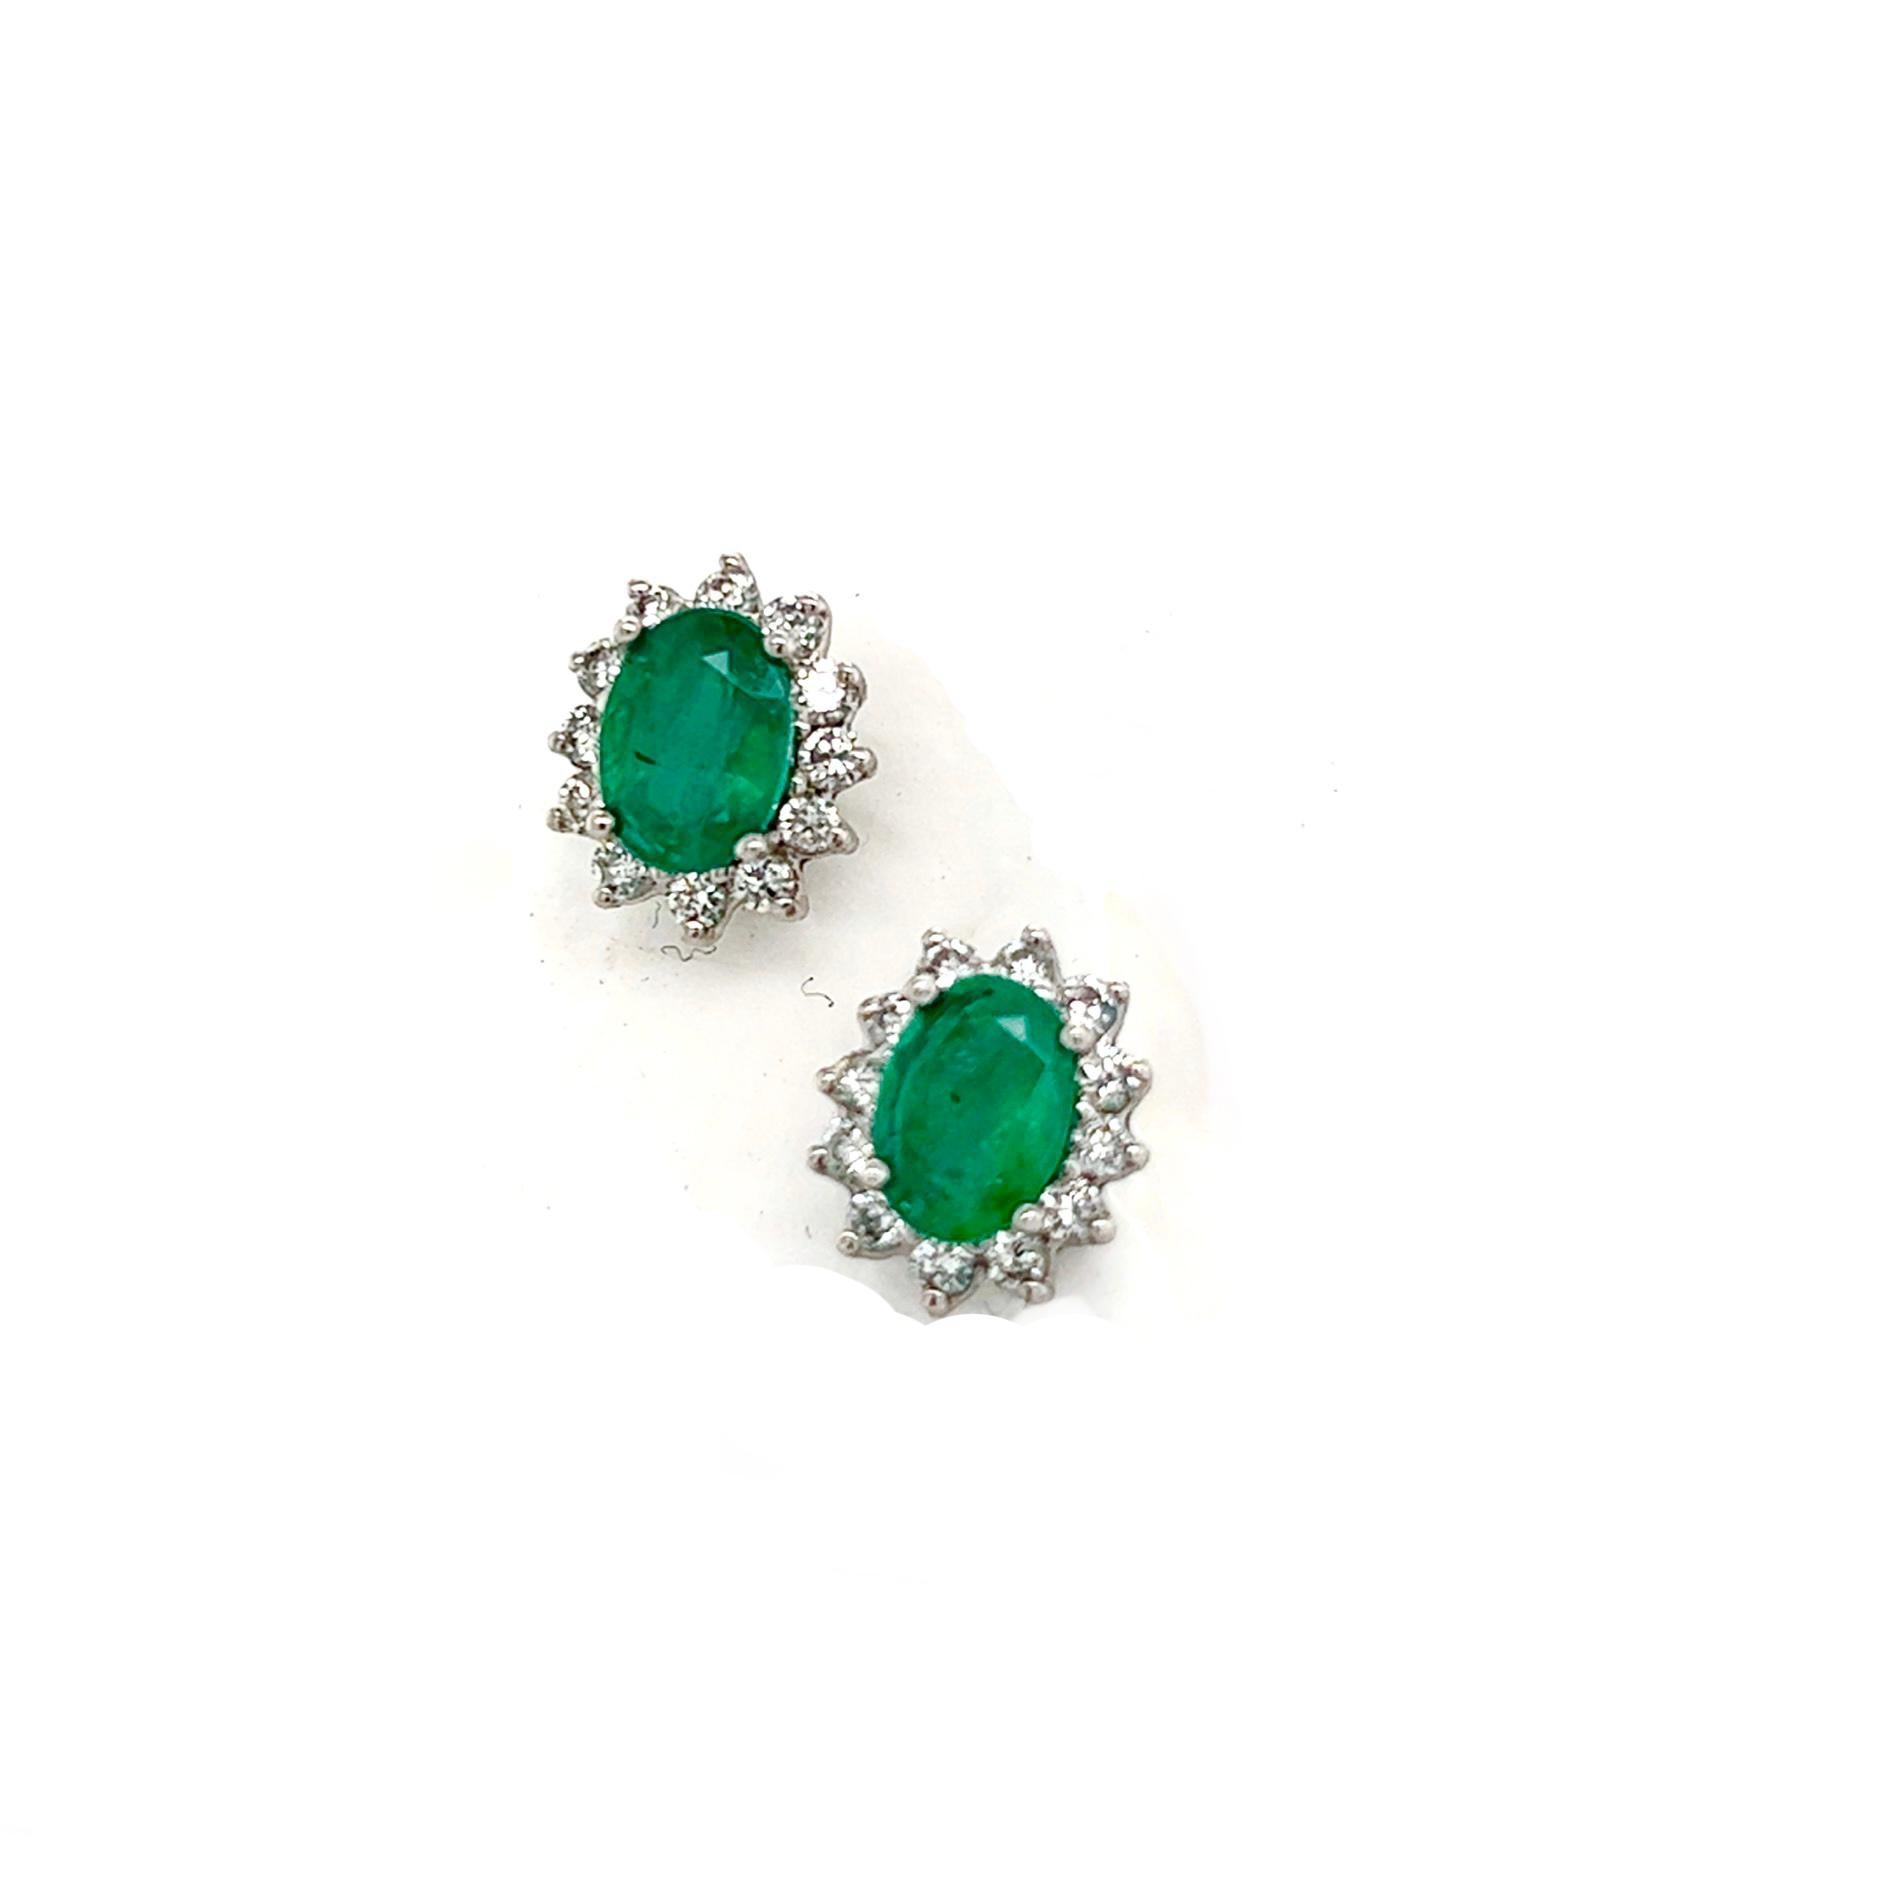 Natural Emerald Diamond Earrings 14k Gold 1.9 TCW Certified $4,950 211344

Nothing says, “I Love you” more than Diamonds and Pearls!

These Emerald earrings have been Certified, Inspected, and Appraised by Gemological Appraisal